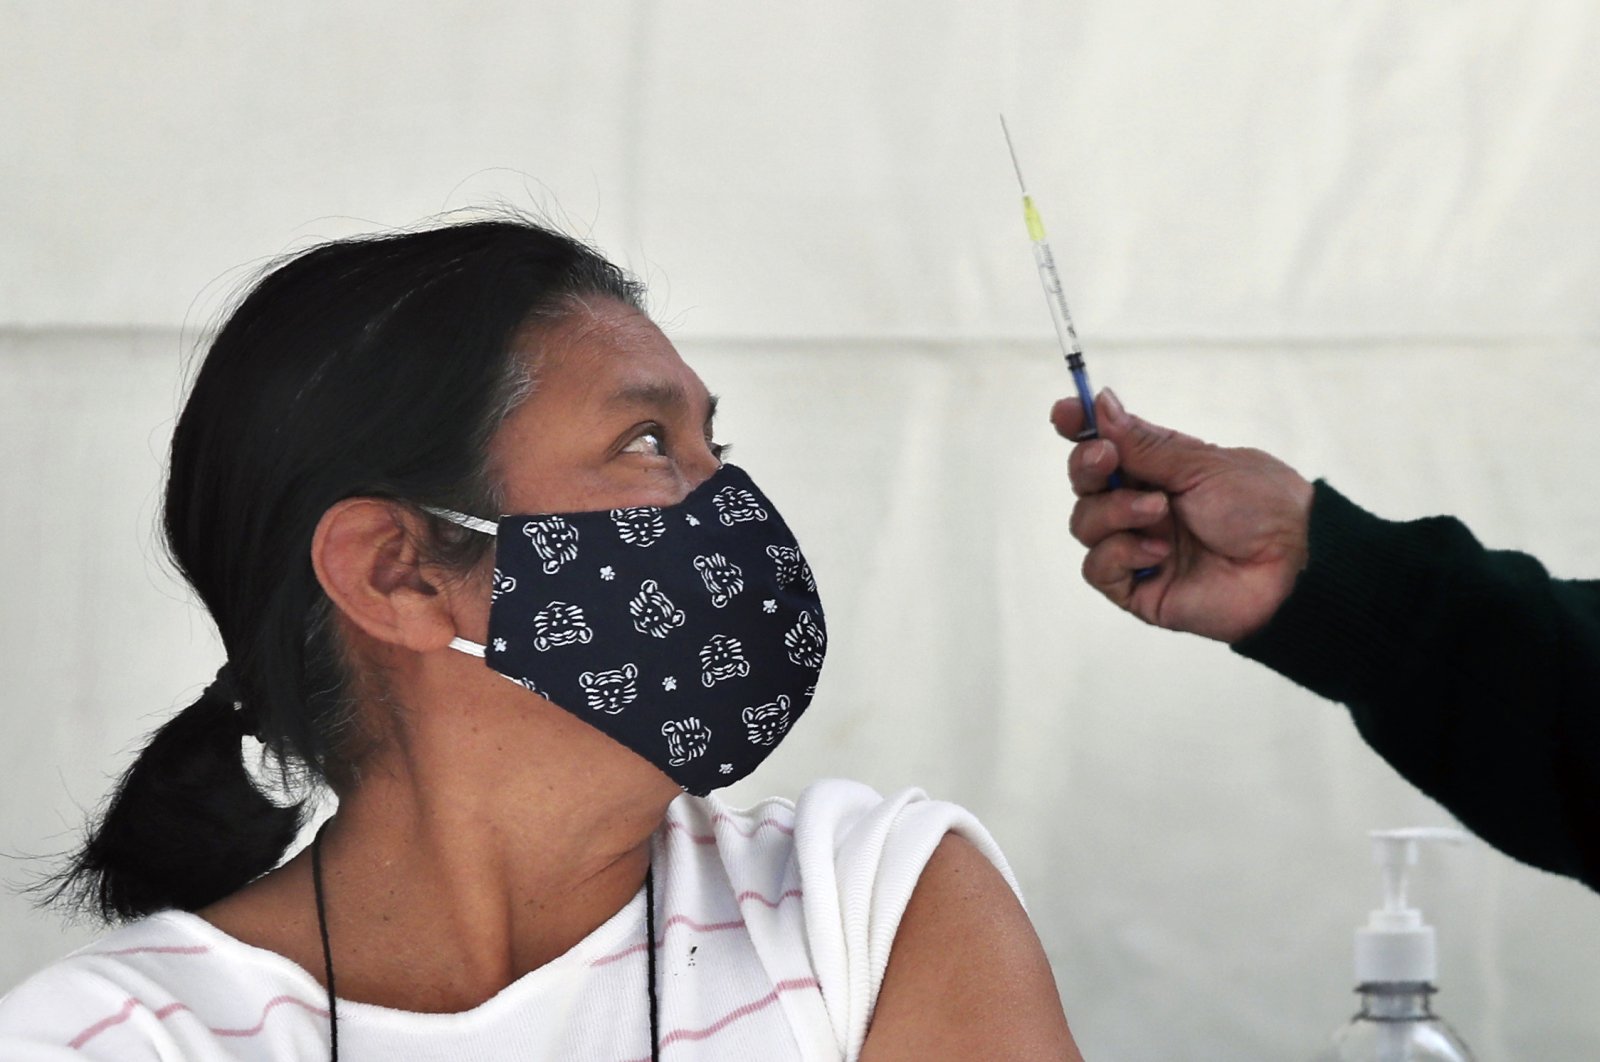 A person prepares to get a shot of the AstraZeneca vaccine against COVID-19 in the Magdalena Contreras area of Mexico City, Monday, Feb. 15, 2021, as Mexico begins to vaccinate people over age 60 against the new coronavirus. (AP Photo)